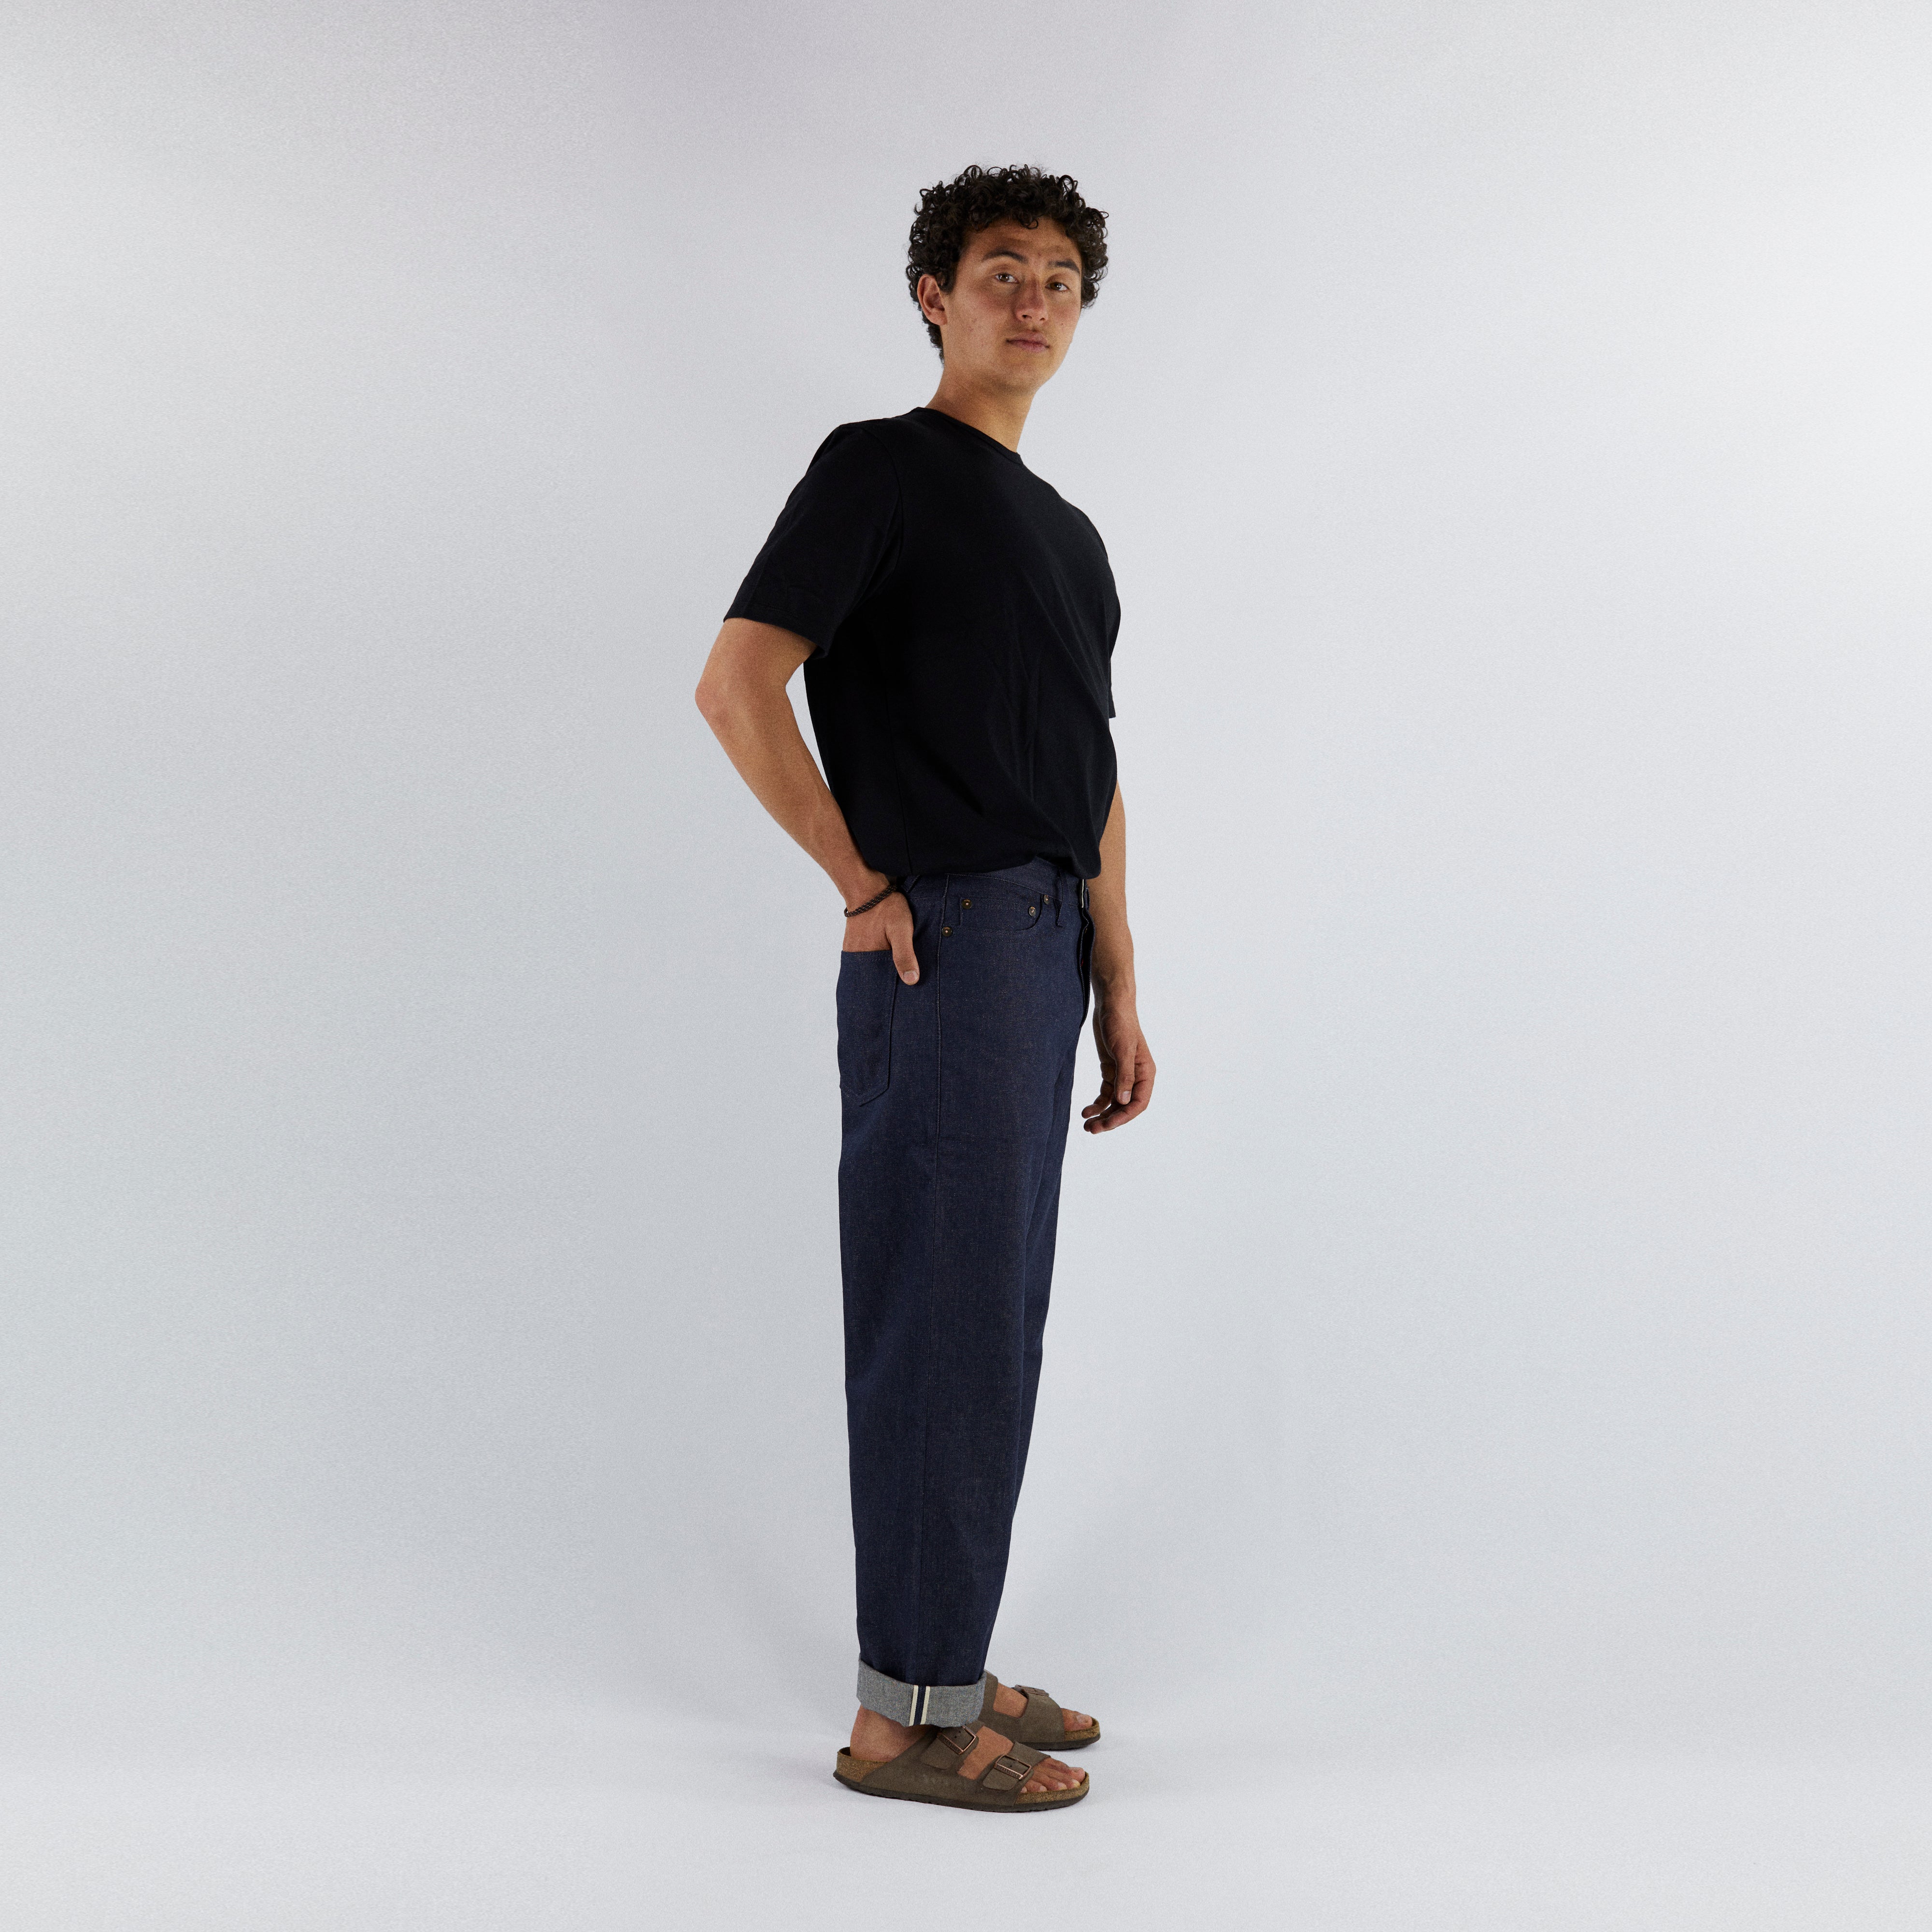 Hiut Denim launches A-B commuter jeans with Polygiene technology